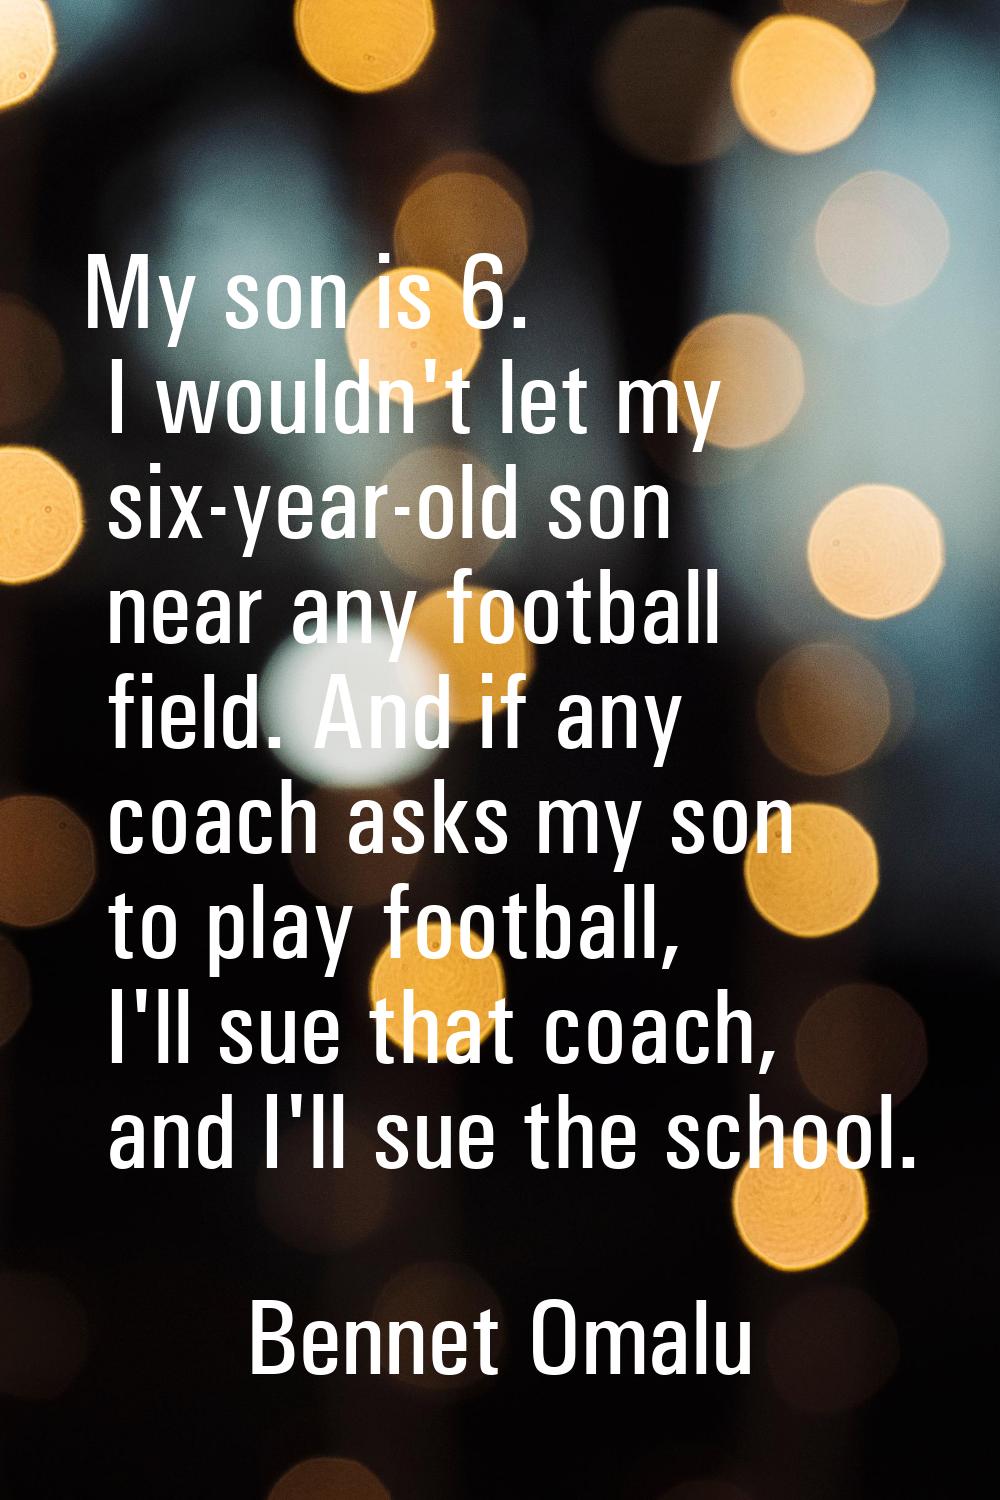 My son is 6. I wouldn't let my six-year-old son near any football field. And if any coach asks my s